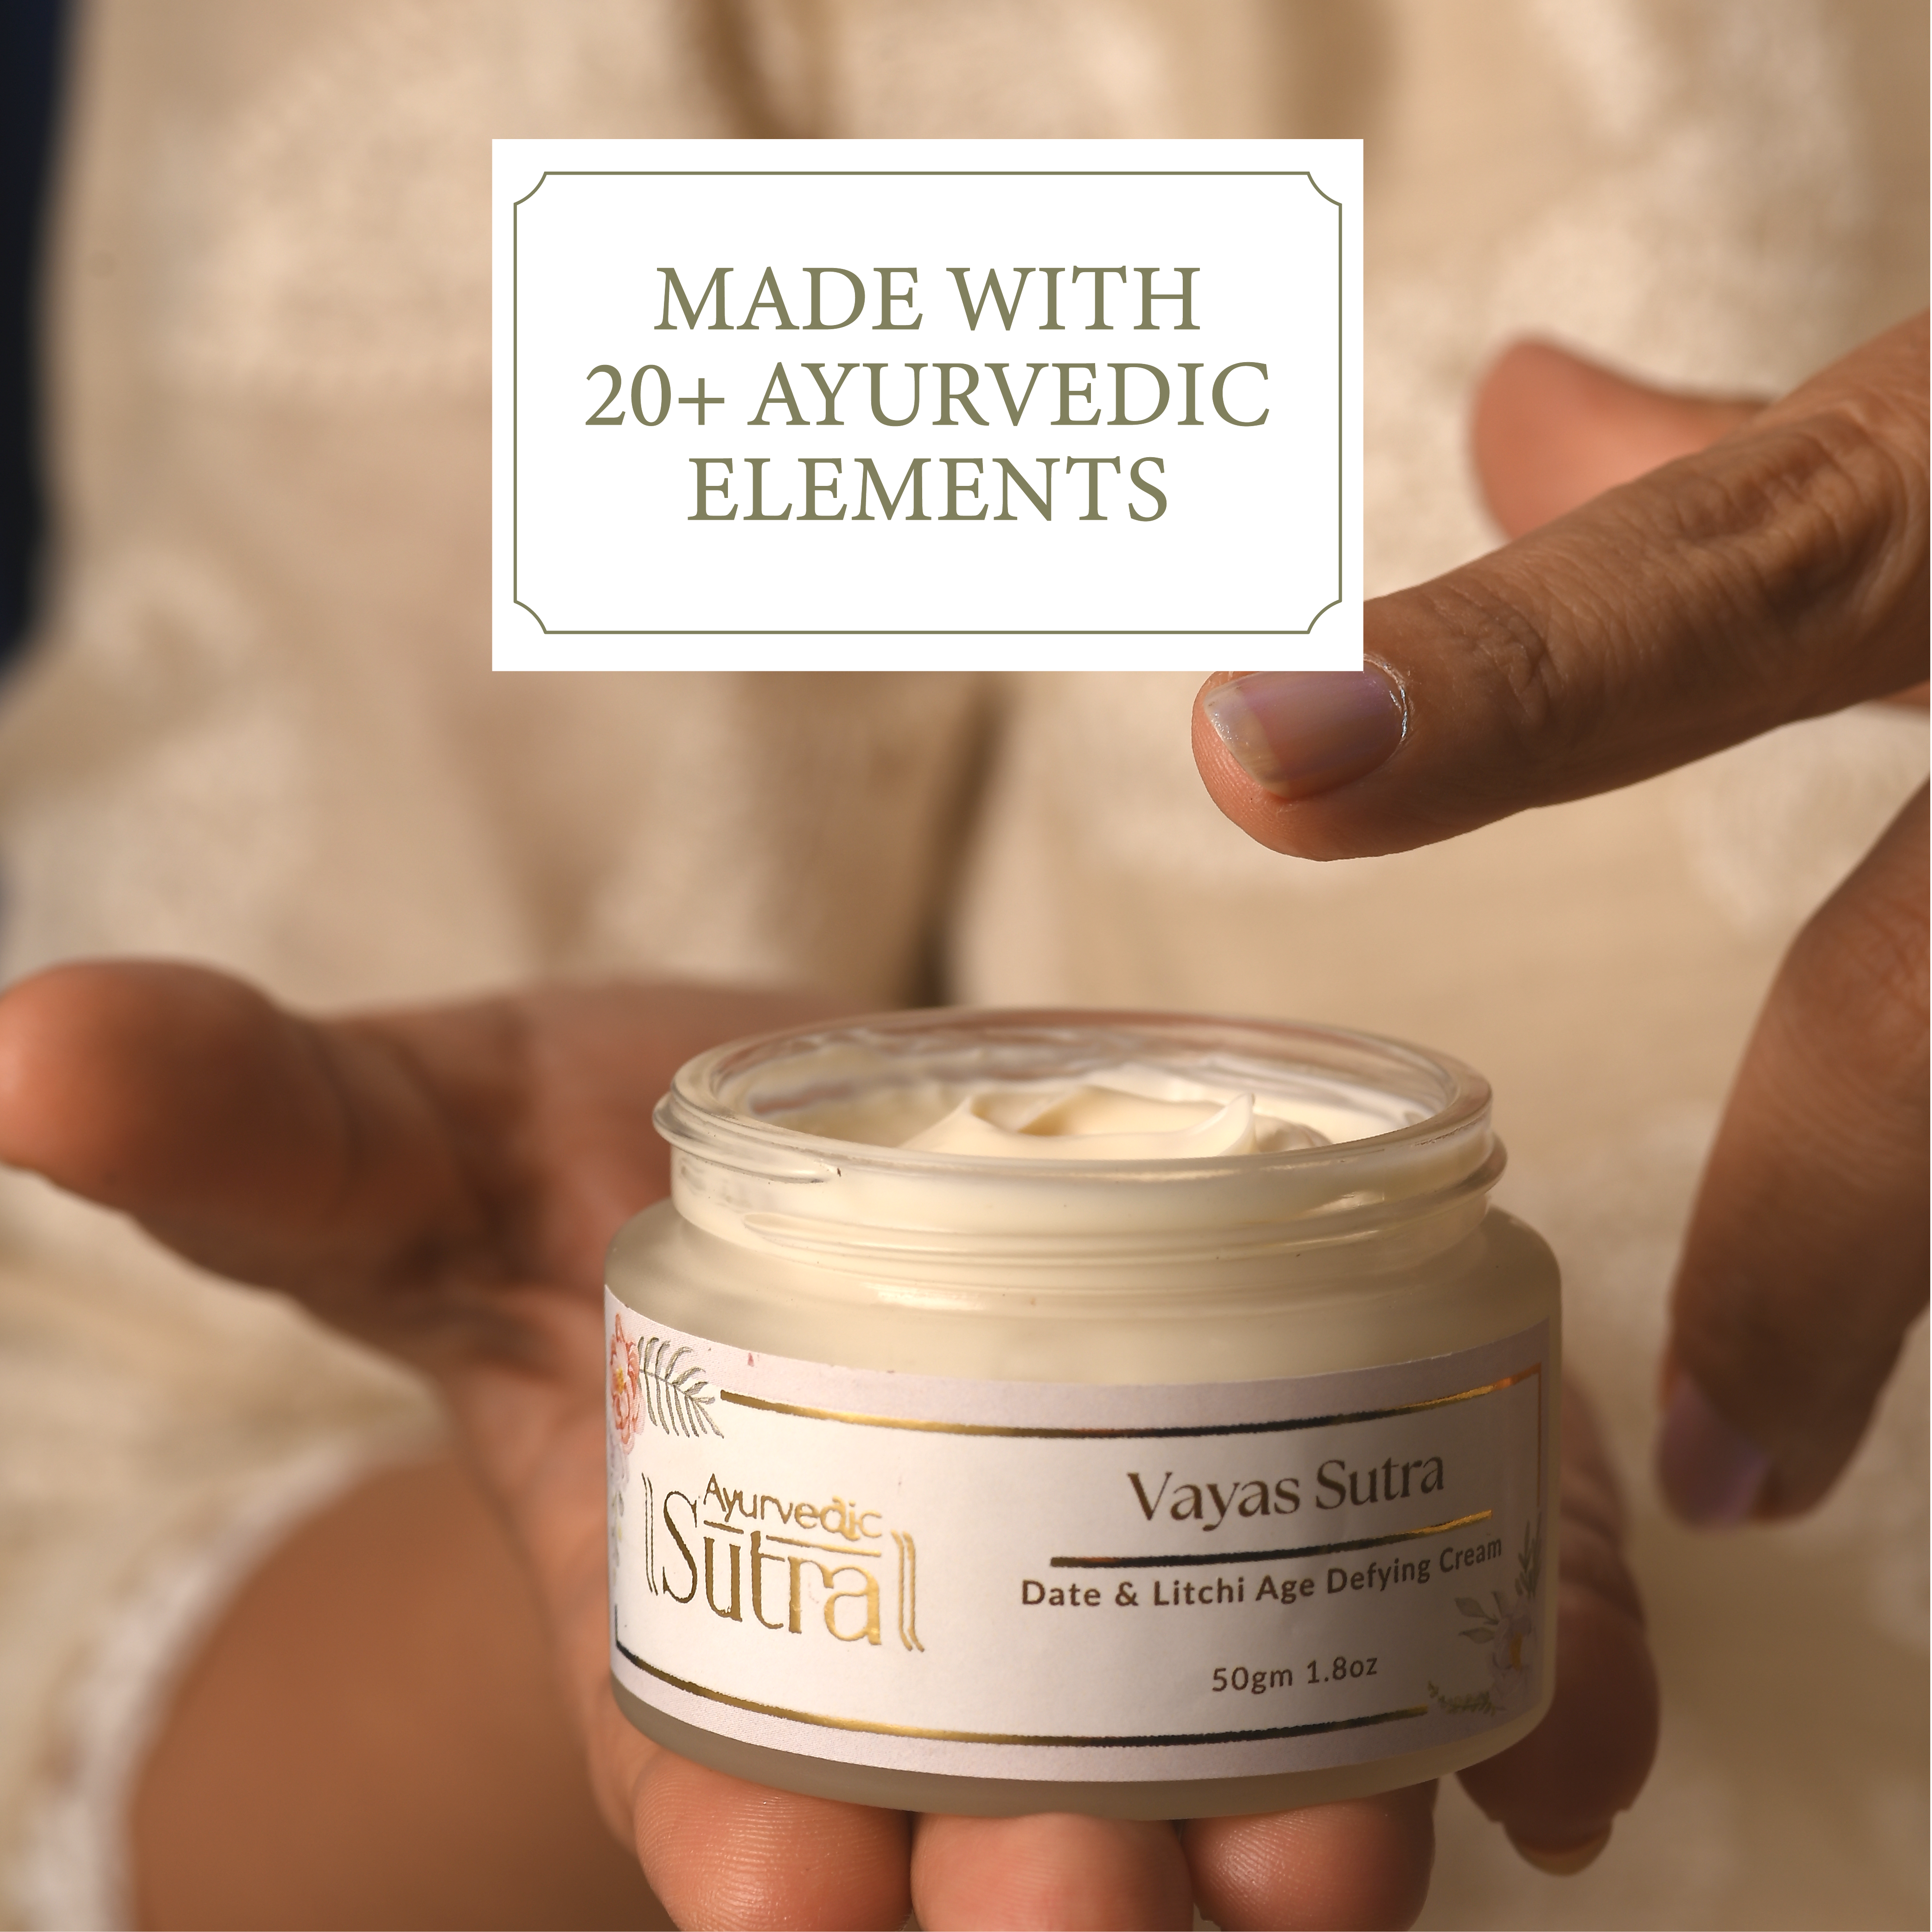 The Best herbal Anti Aging Cream for Reducing Wrinkles and Fine Lines